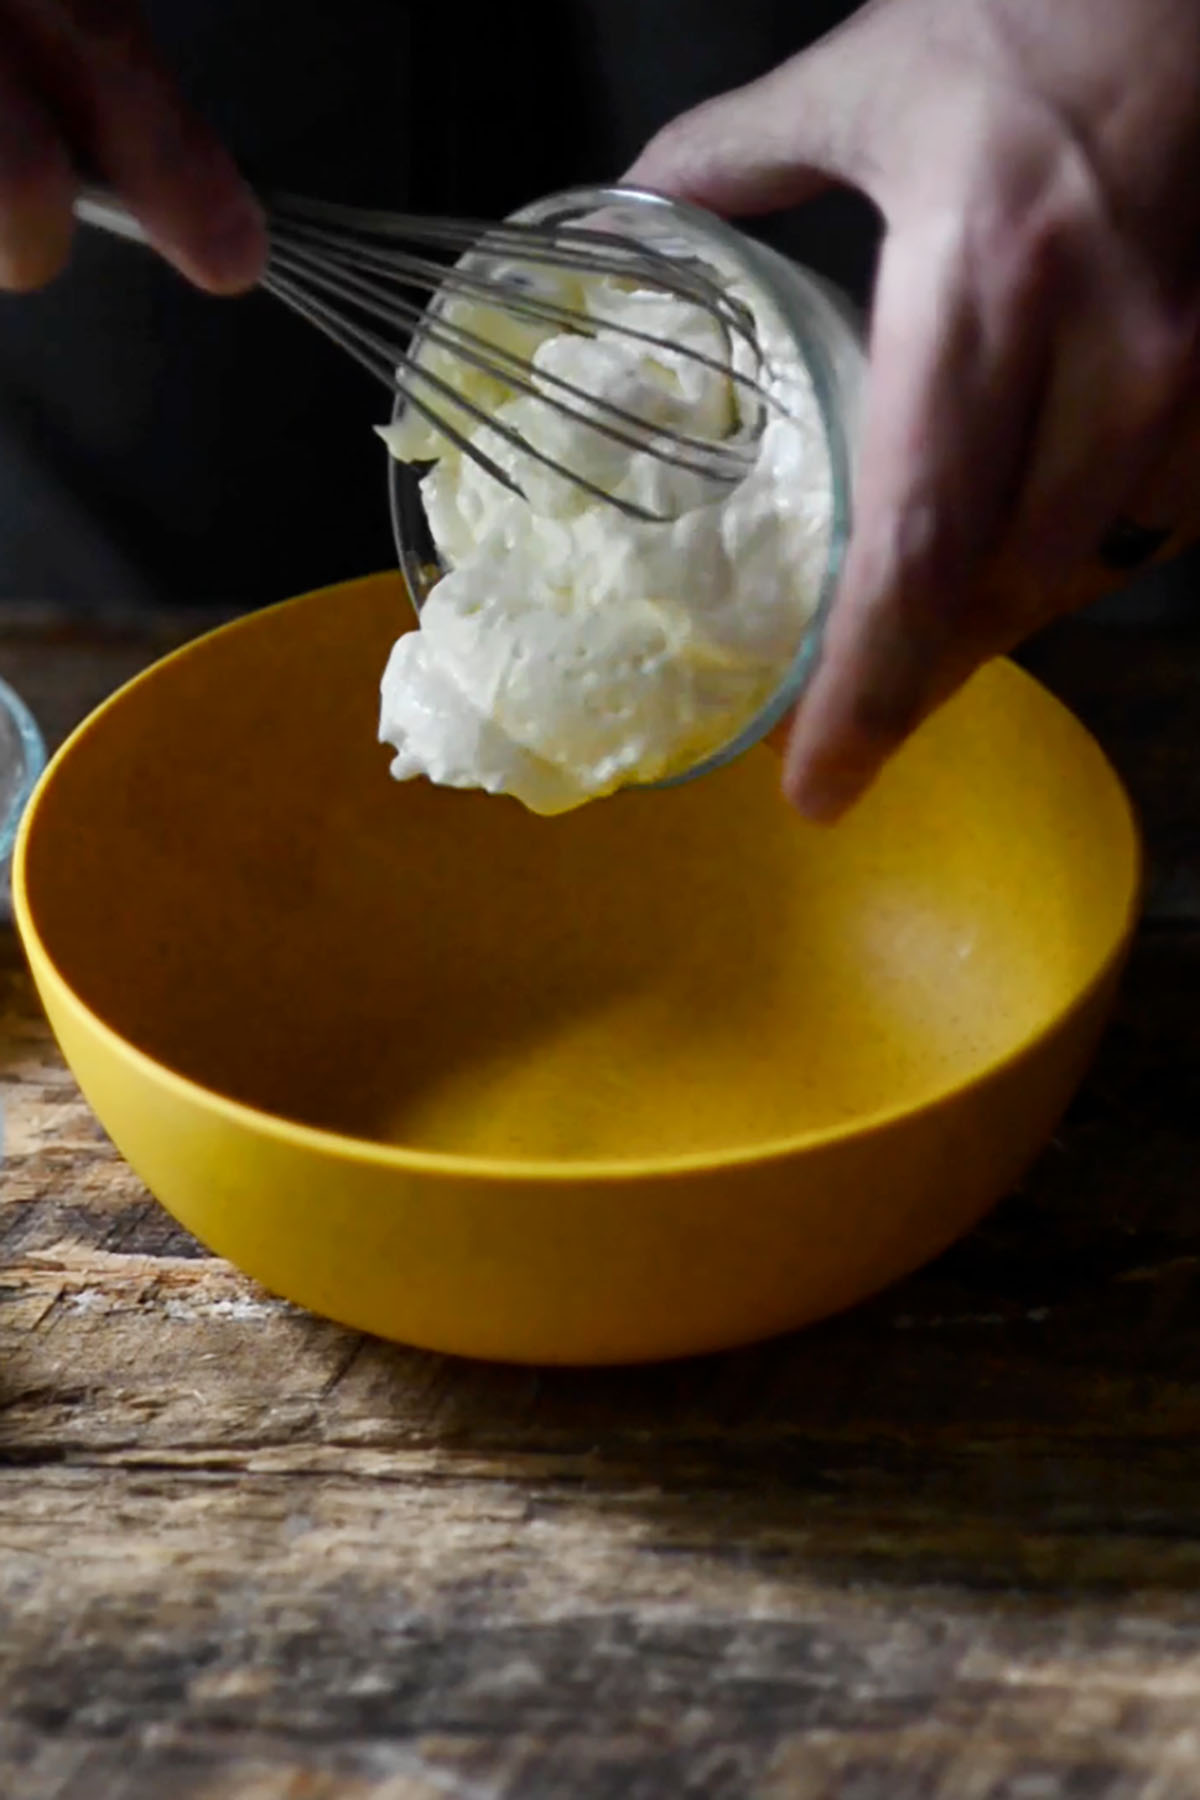 Mayonnaise being added to a small mixing bowl.